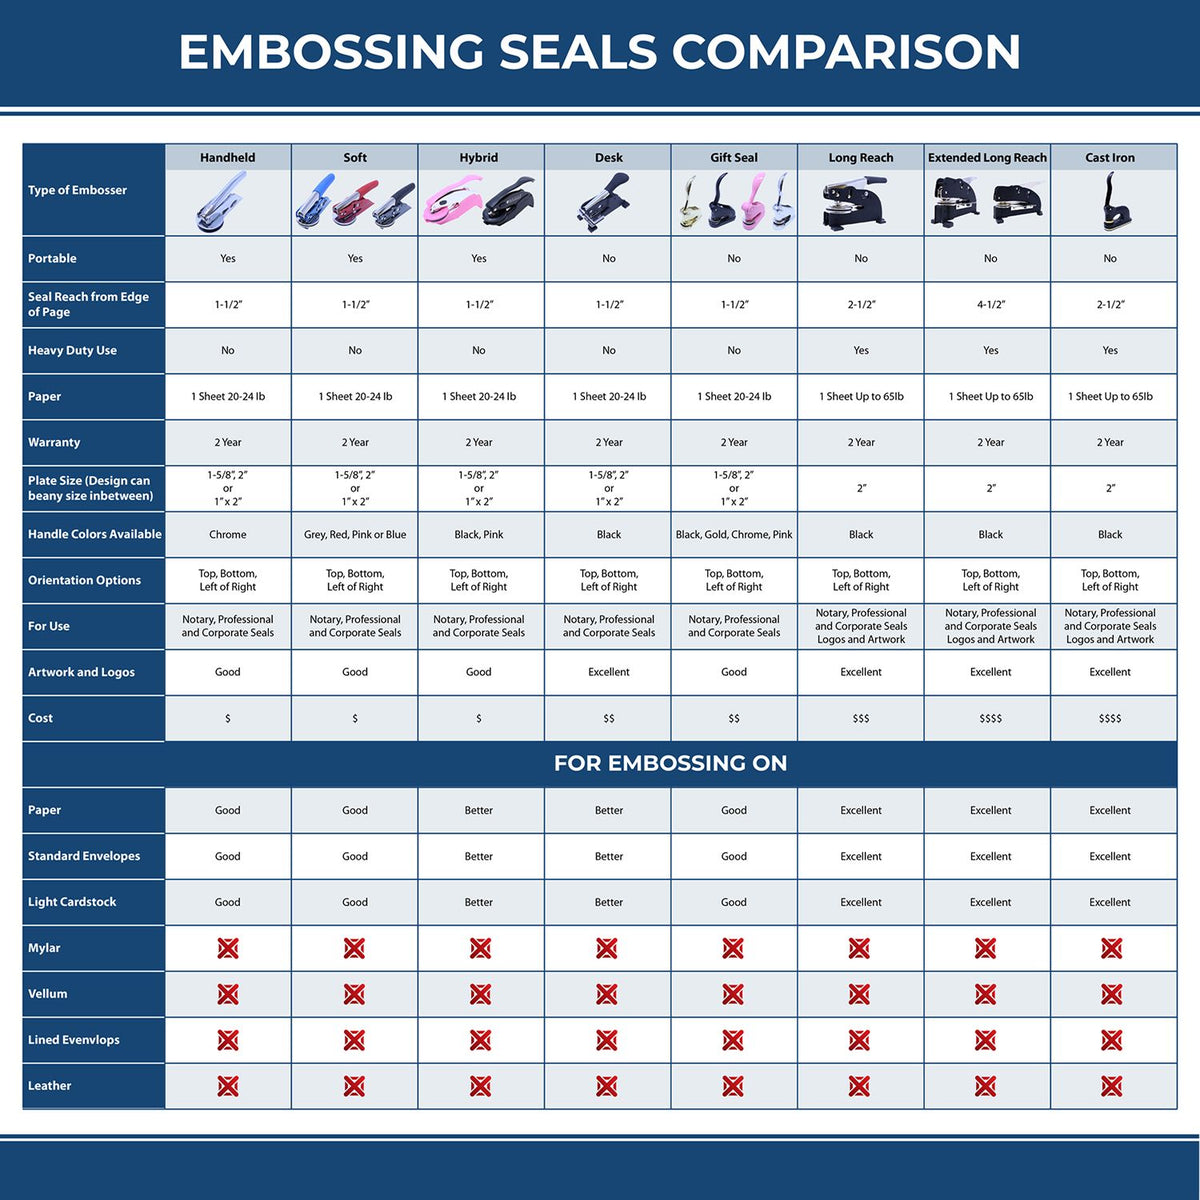 A comparison chart for the different types of mount models available for the Long Reach Alaska Geology Seal